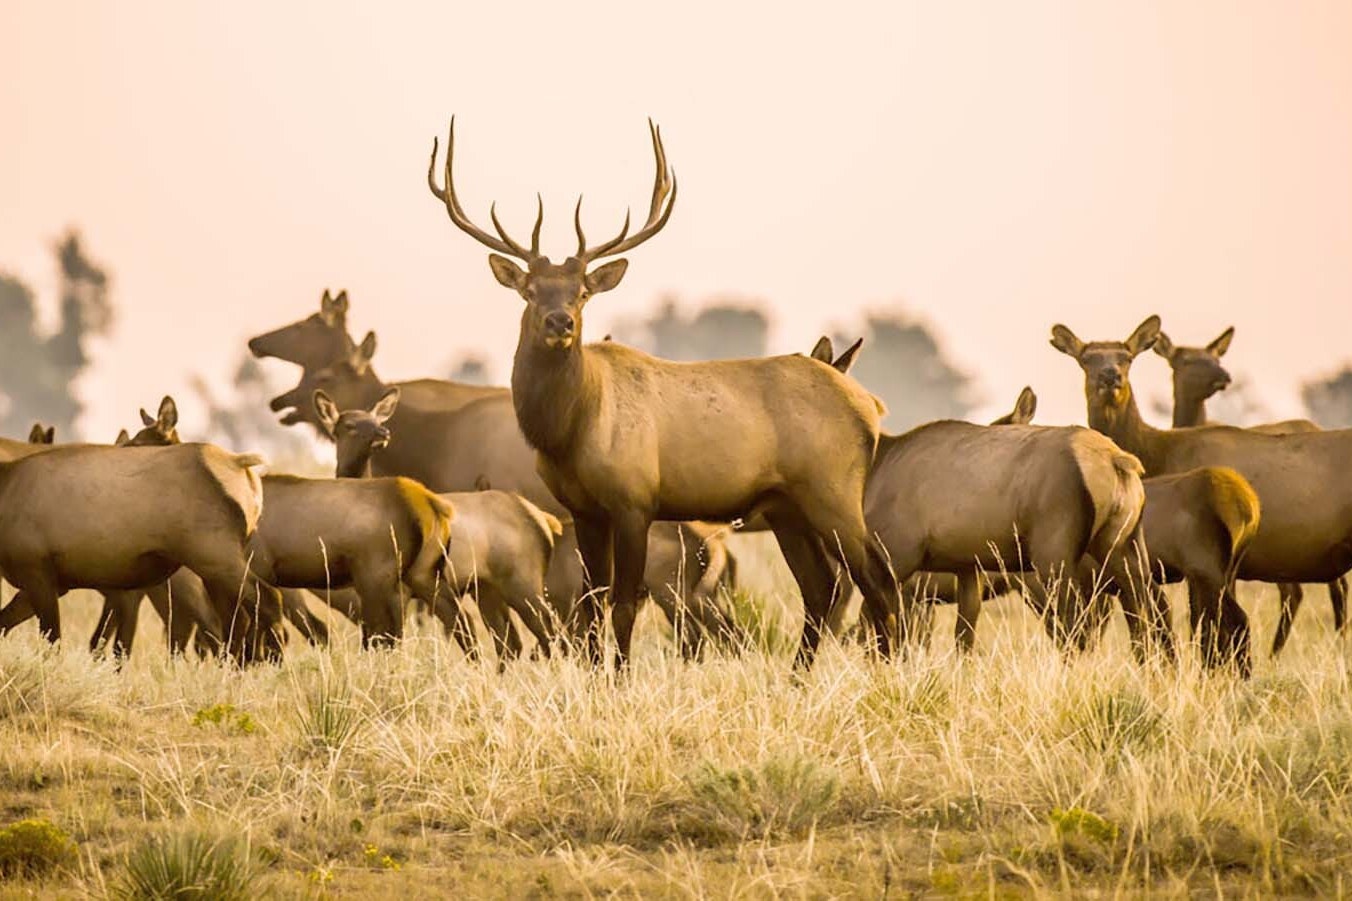 Elk started filtering into Nebraska from Wyoming decades ago, but recently their numbers have swollen to where they’re causing some problems, particularly in corn fields.